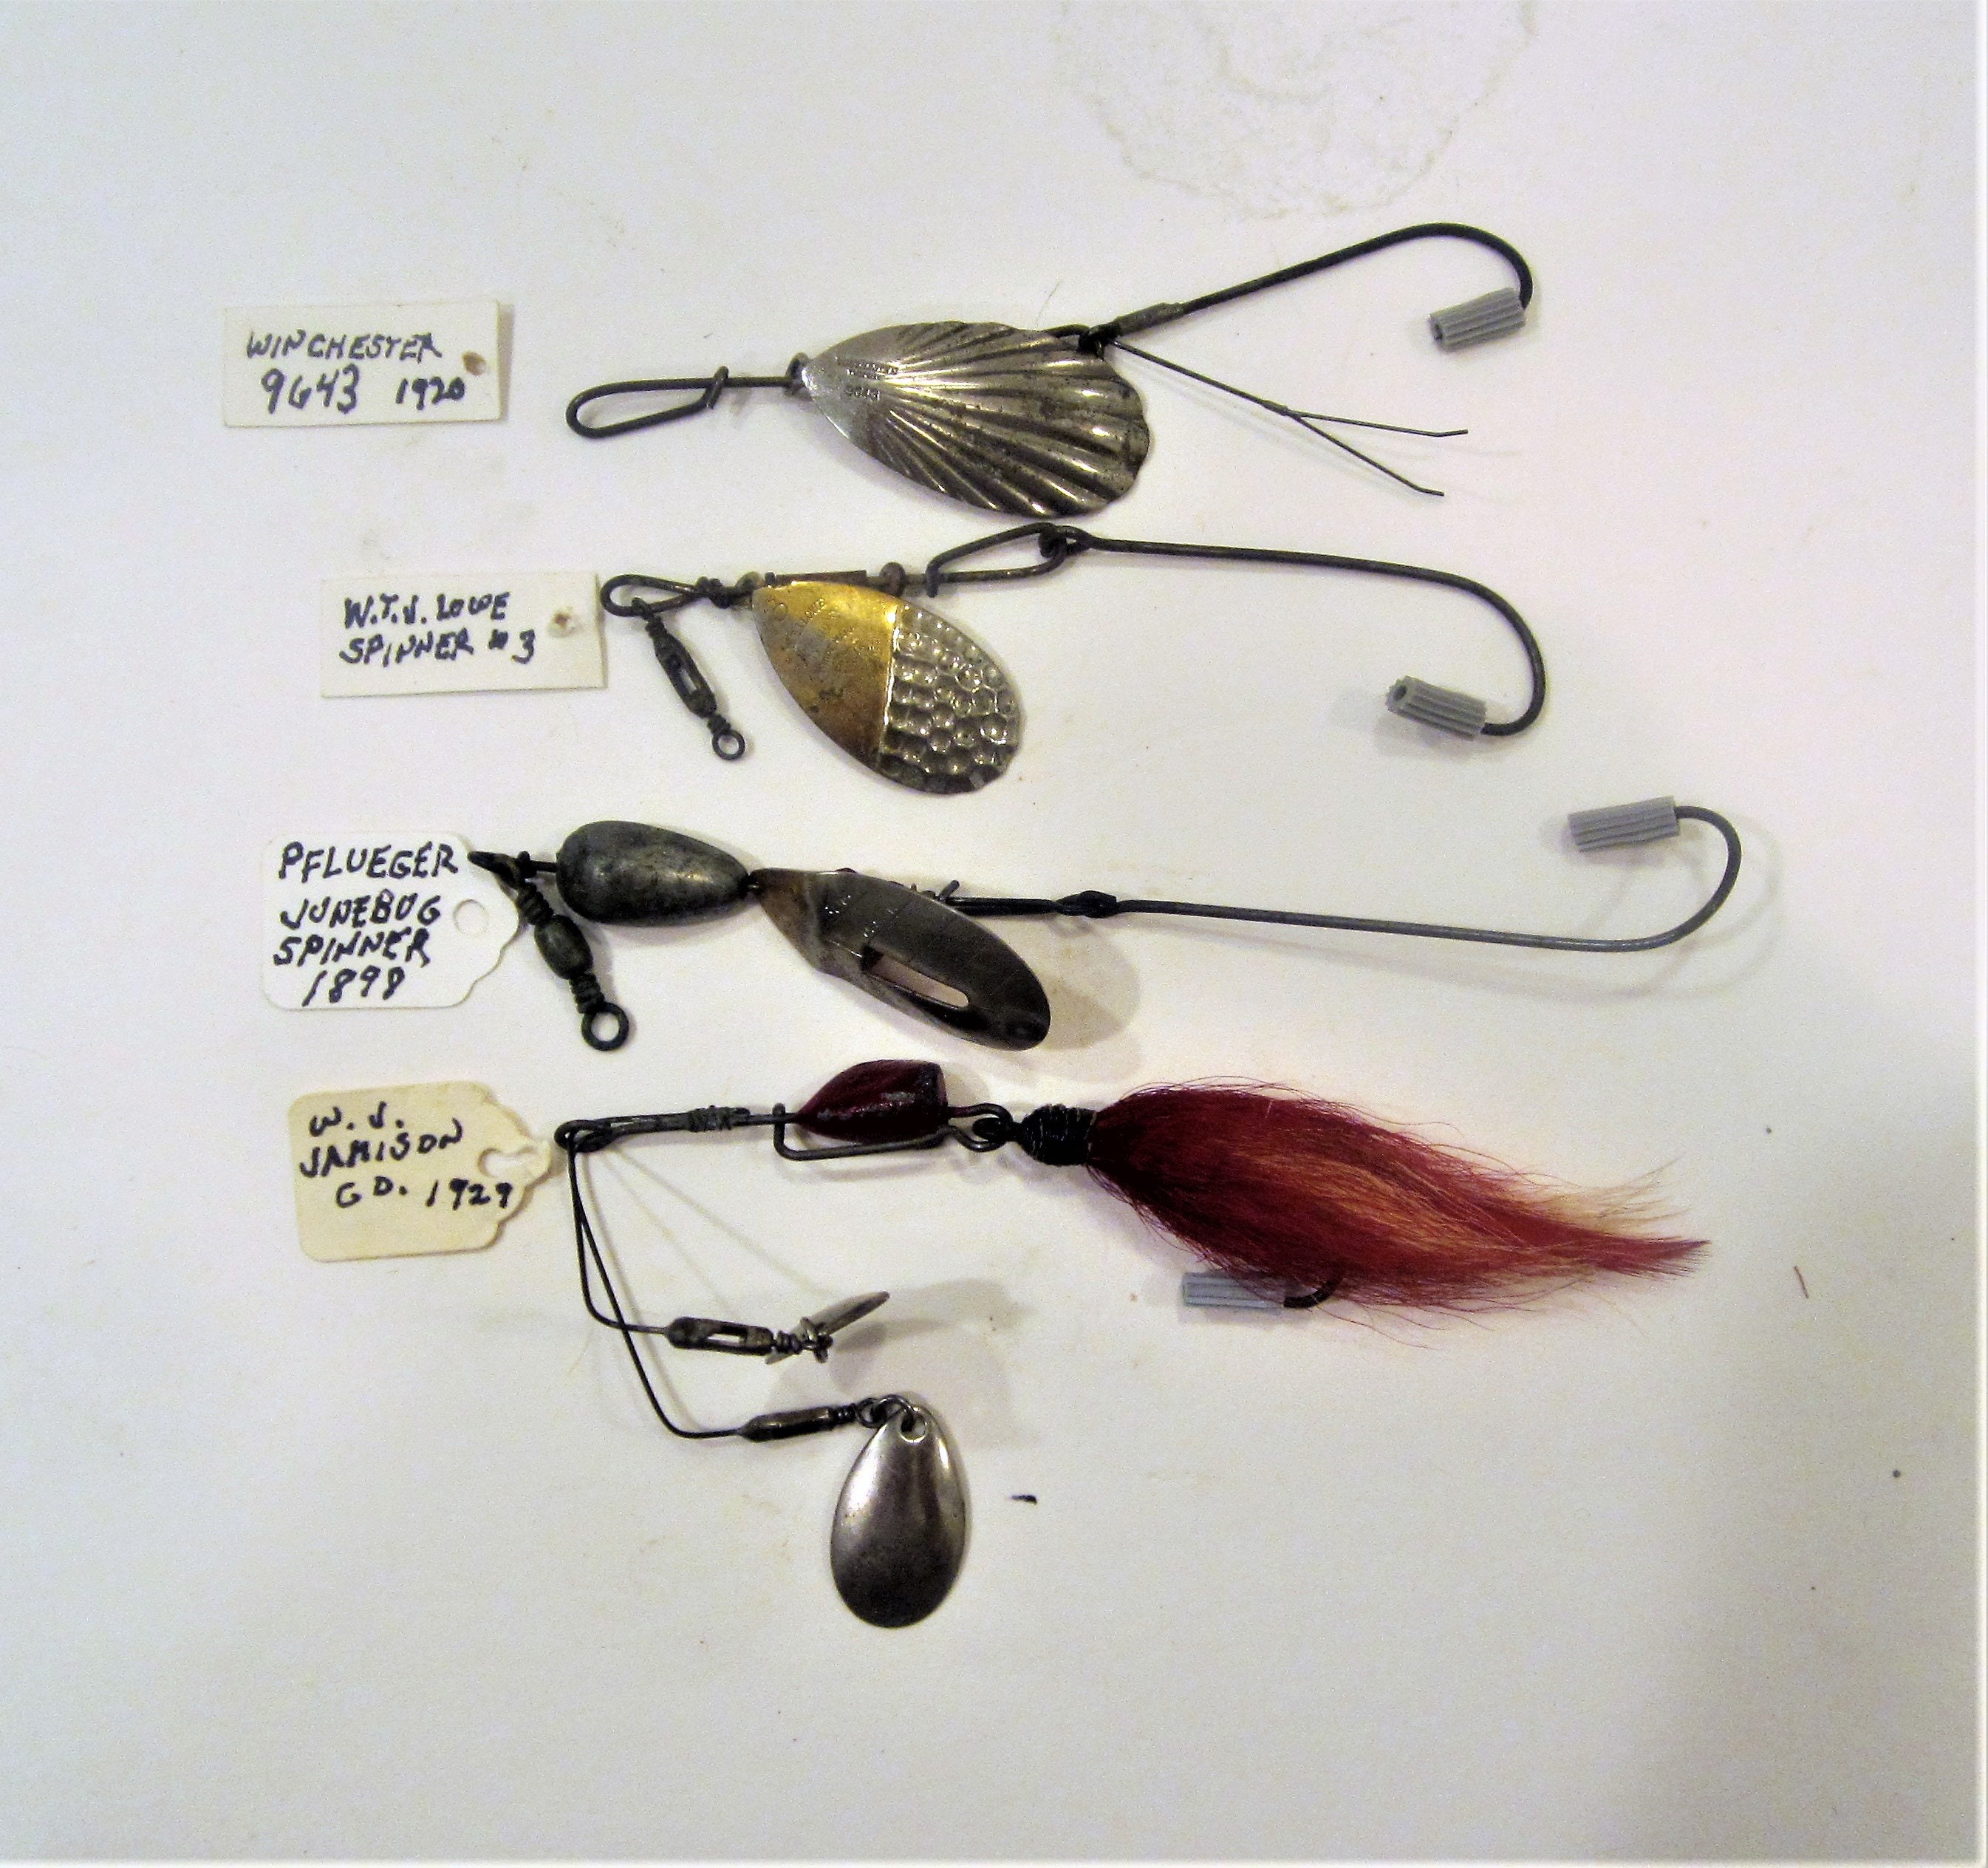 4 Antique Spinning Lures / Different Lure Co / Winchester  Arms-W.T.J.Loew-Pflueger-W.J.Jamison / All Original / Collectible / Gift  Item